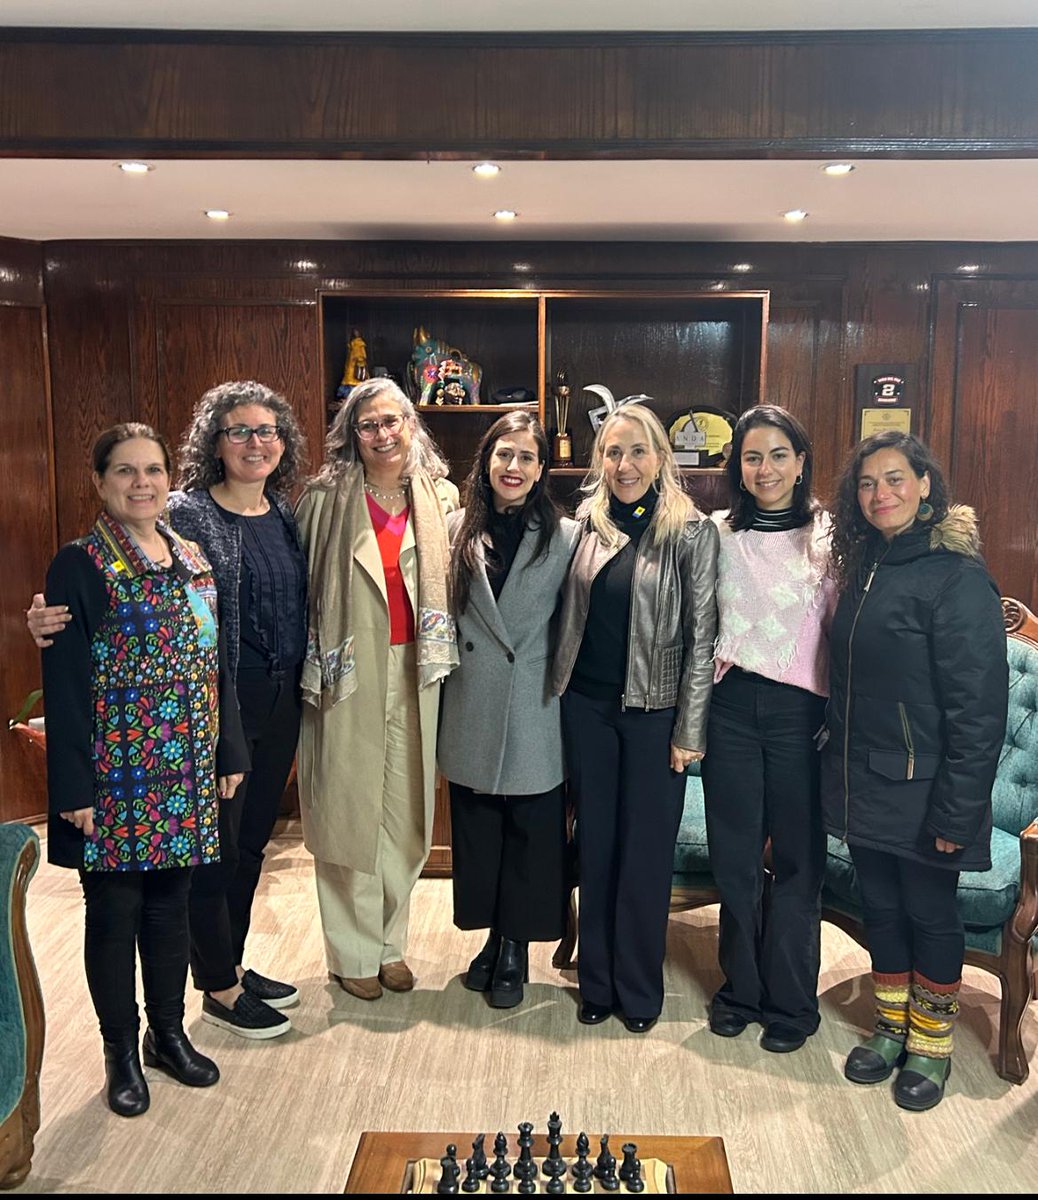 Yesterday, members of the Lincoln Institute team supporting post disaster reconstruction efforts in Chile met with the mayor of Municipalidad de Viña del Mar (@vinadelmar), Macarena Ripamonti Serrano (@MacaRipa).